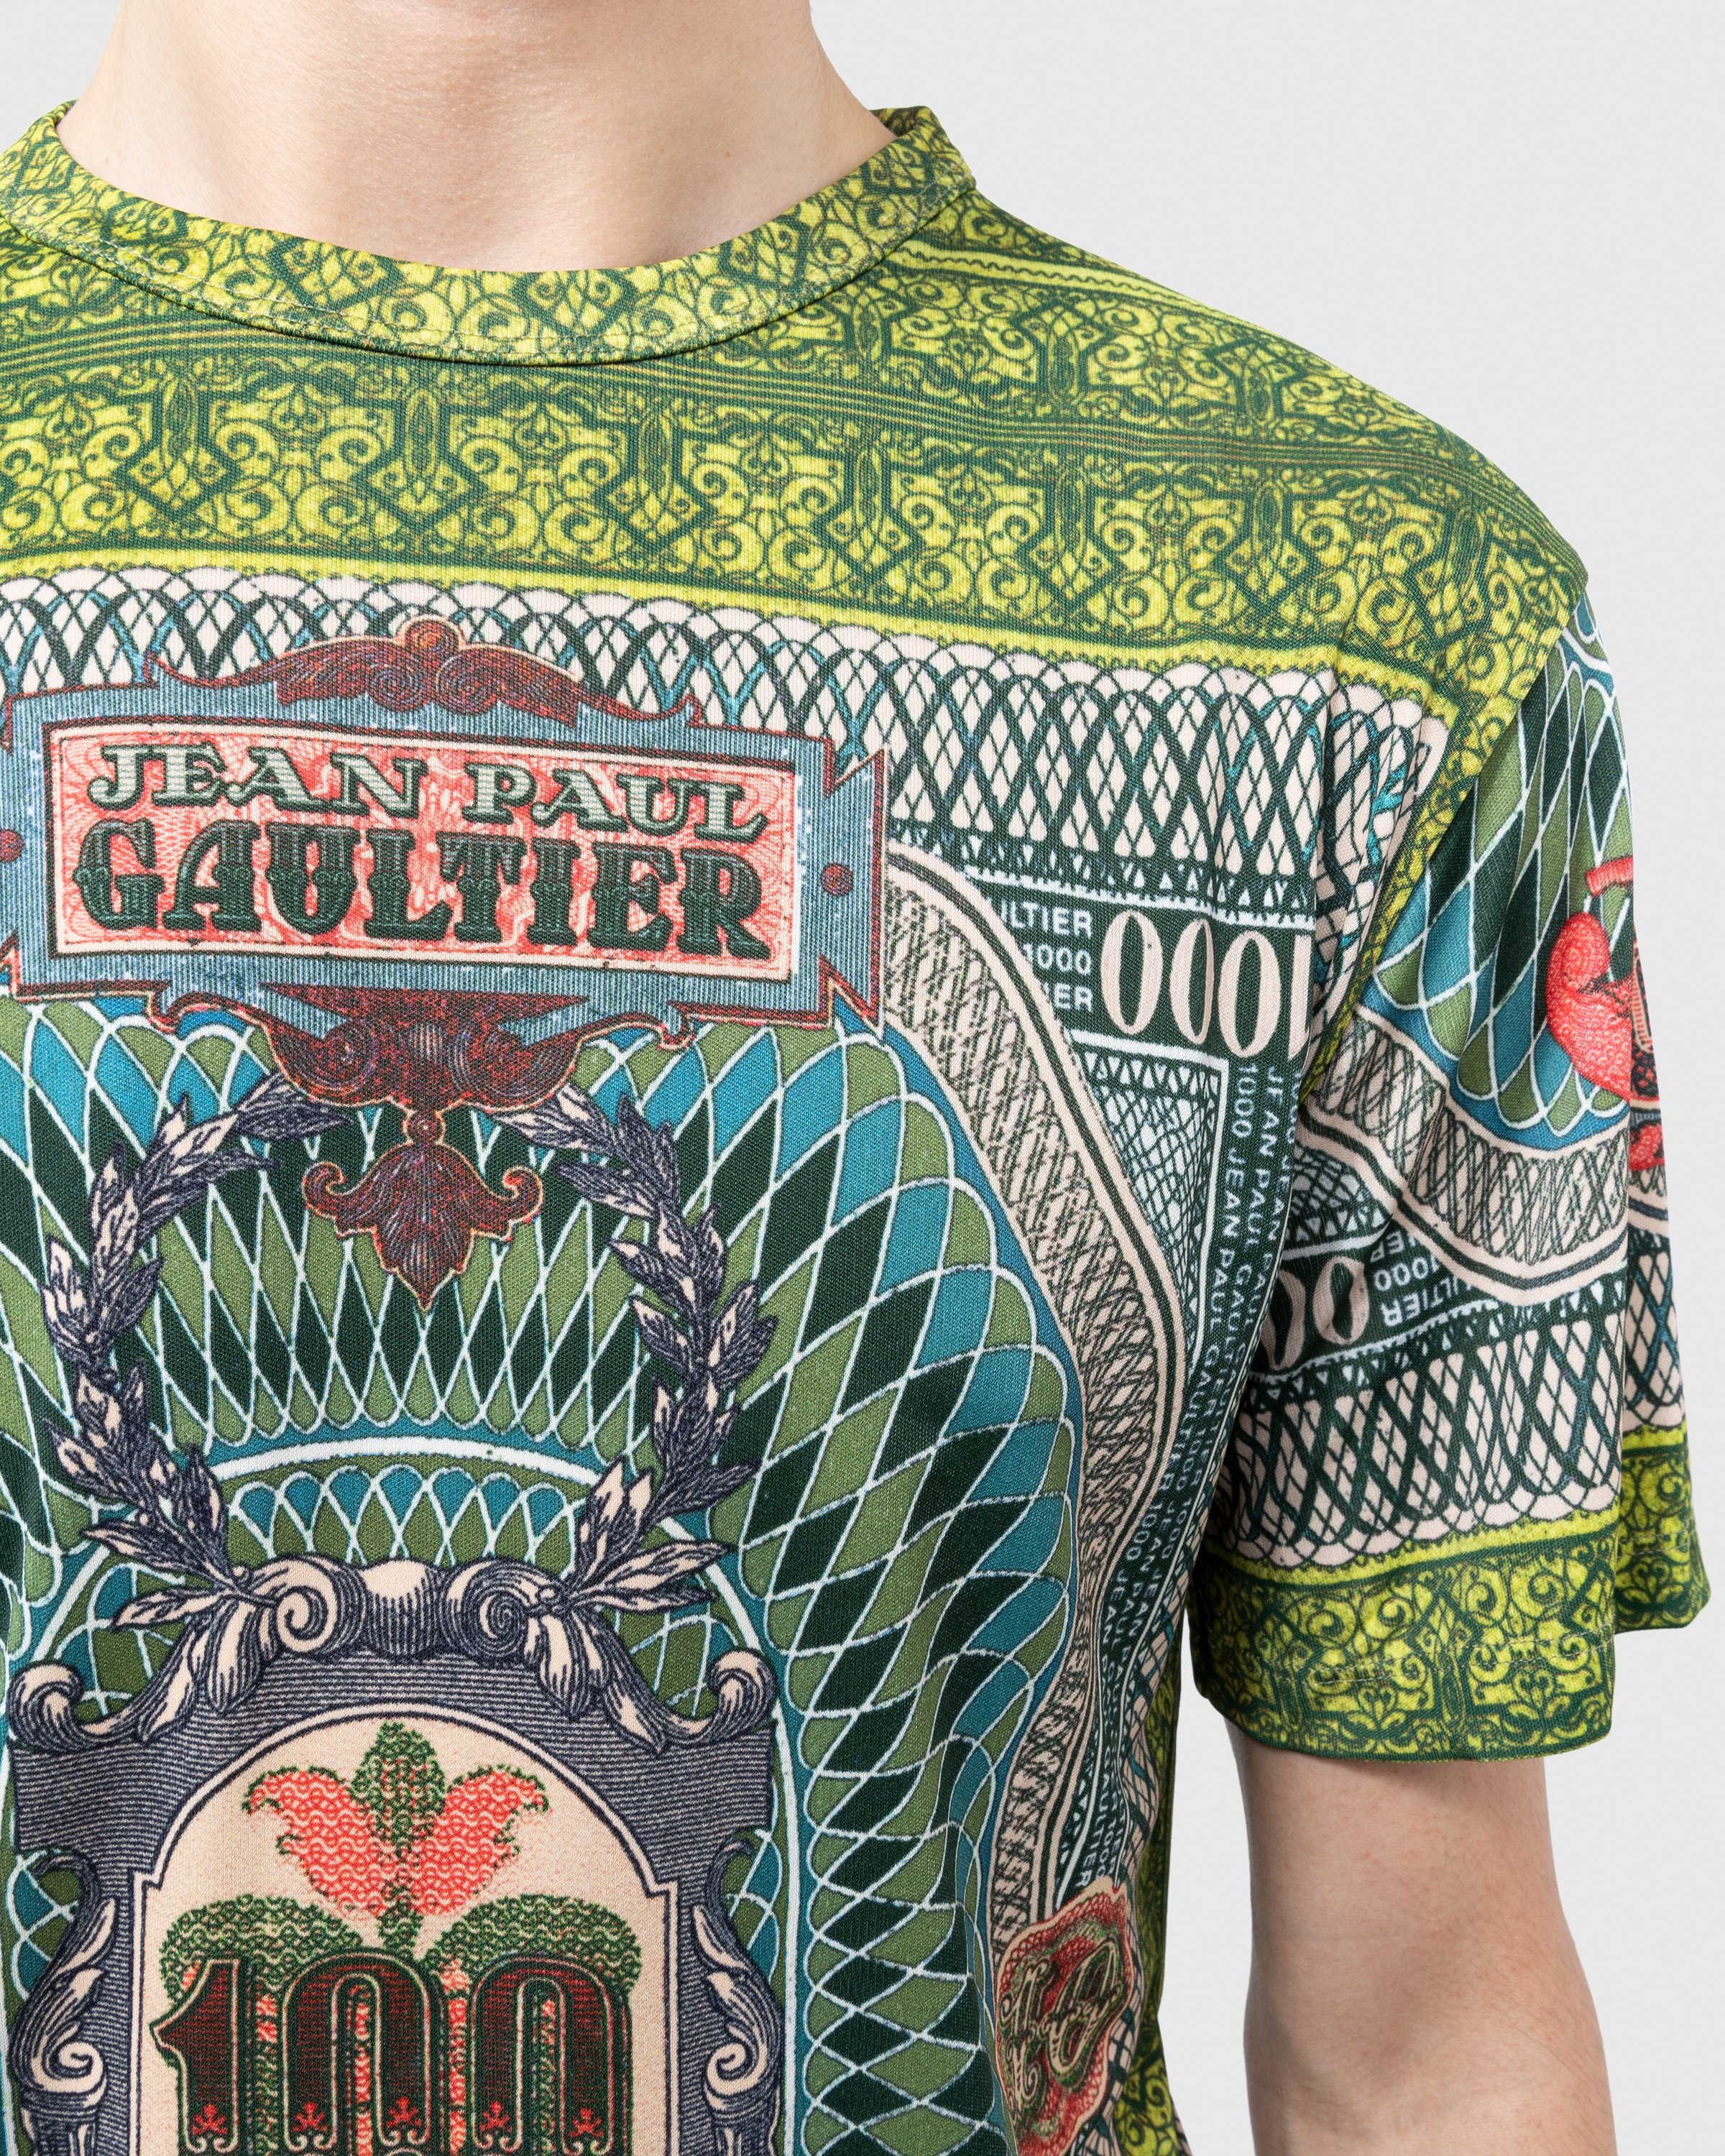 Jean Paul Gaultier - Banknote T-Shirt Multi - Clothing - Green - Image 4